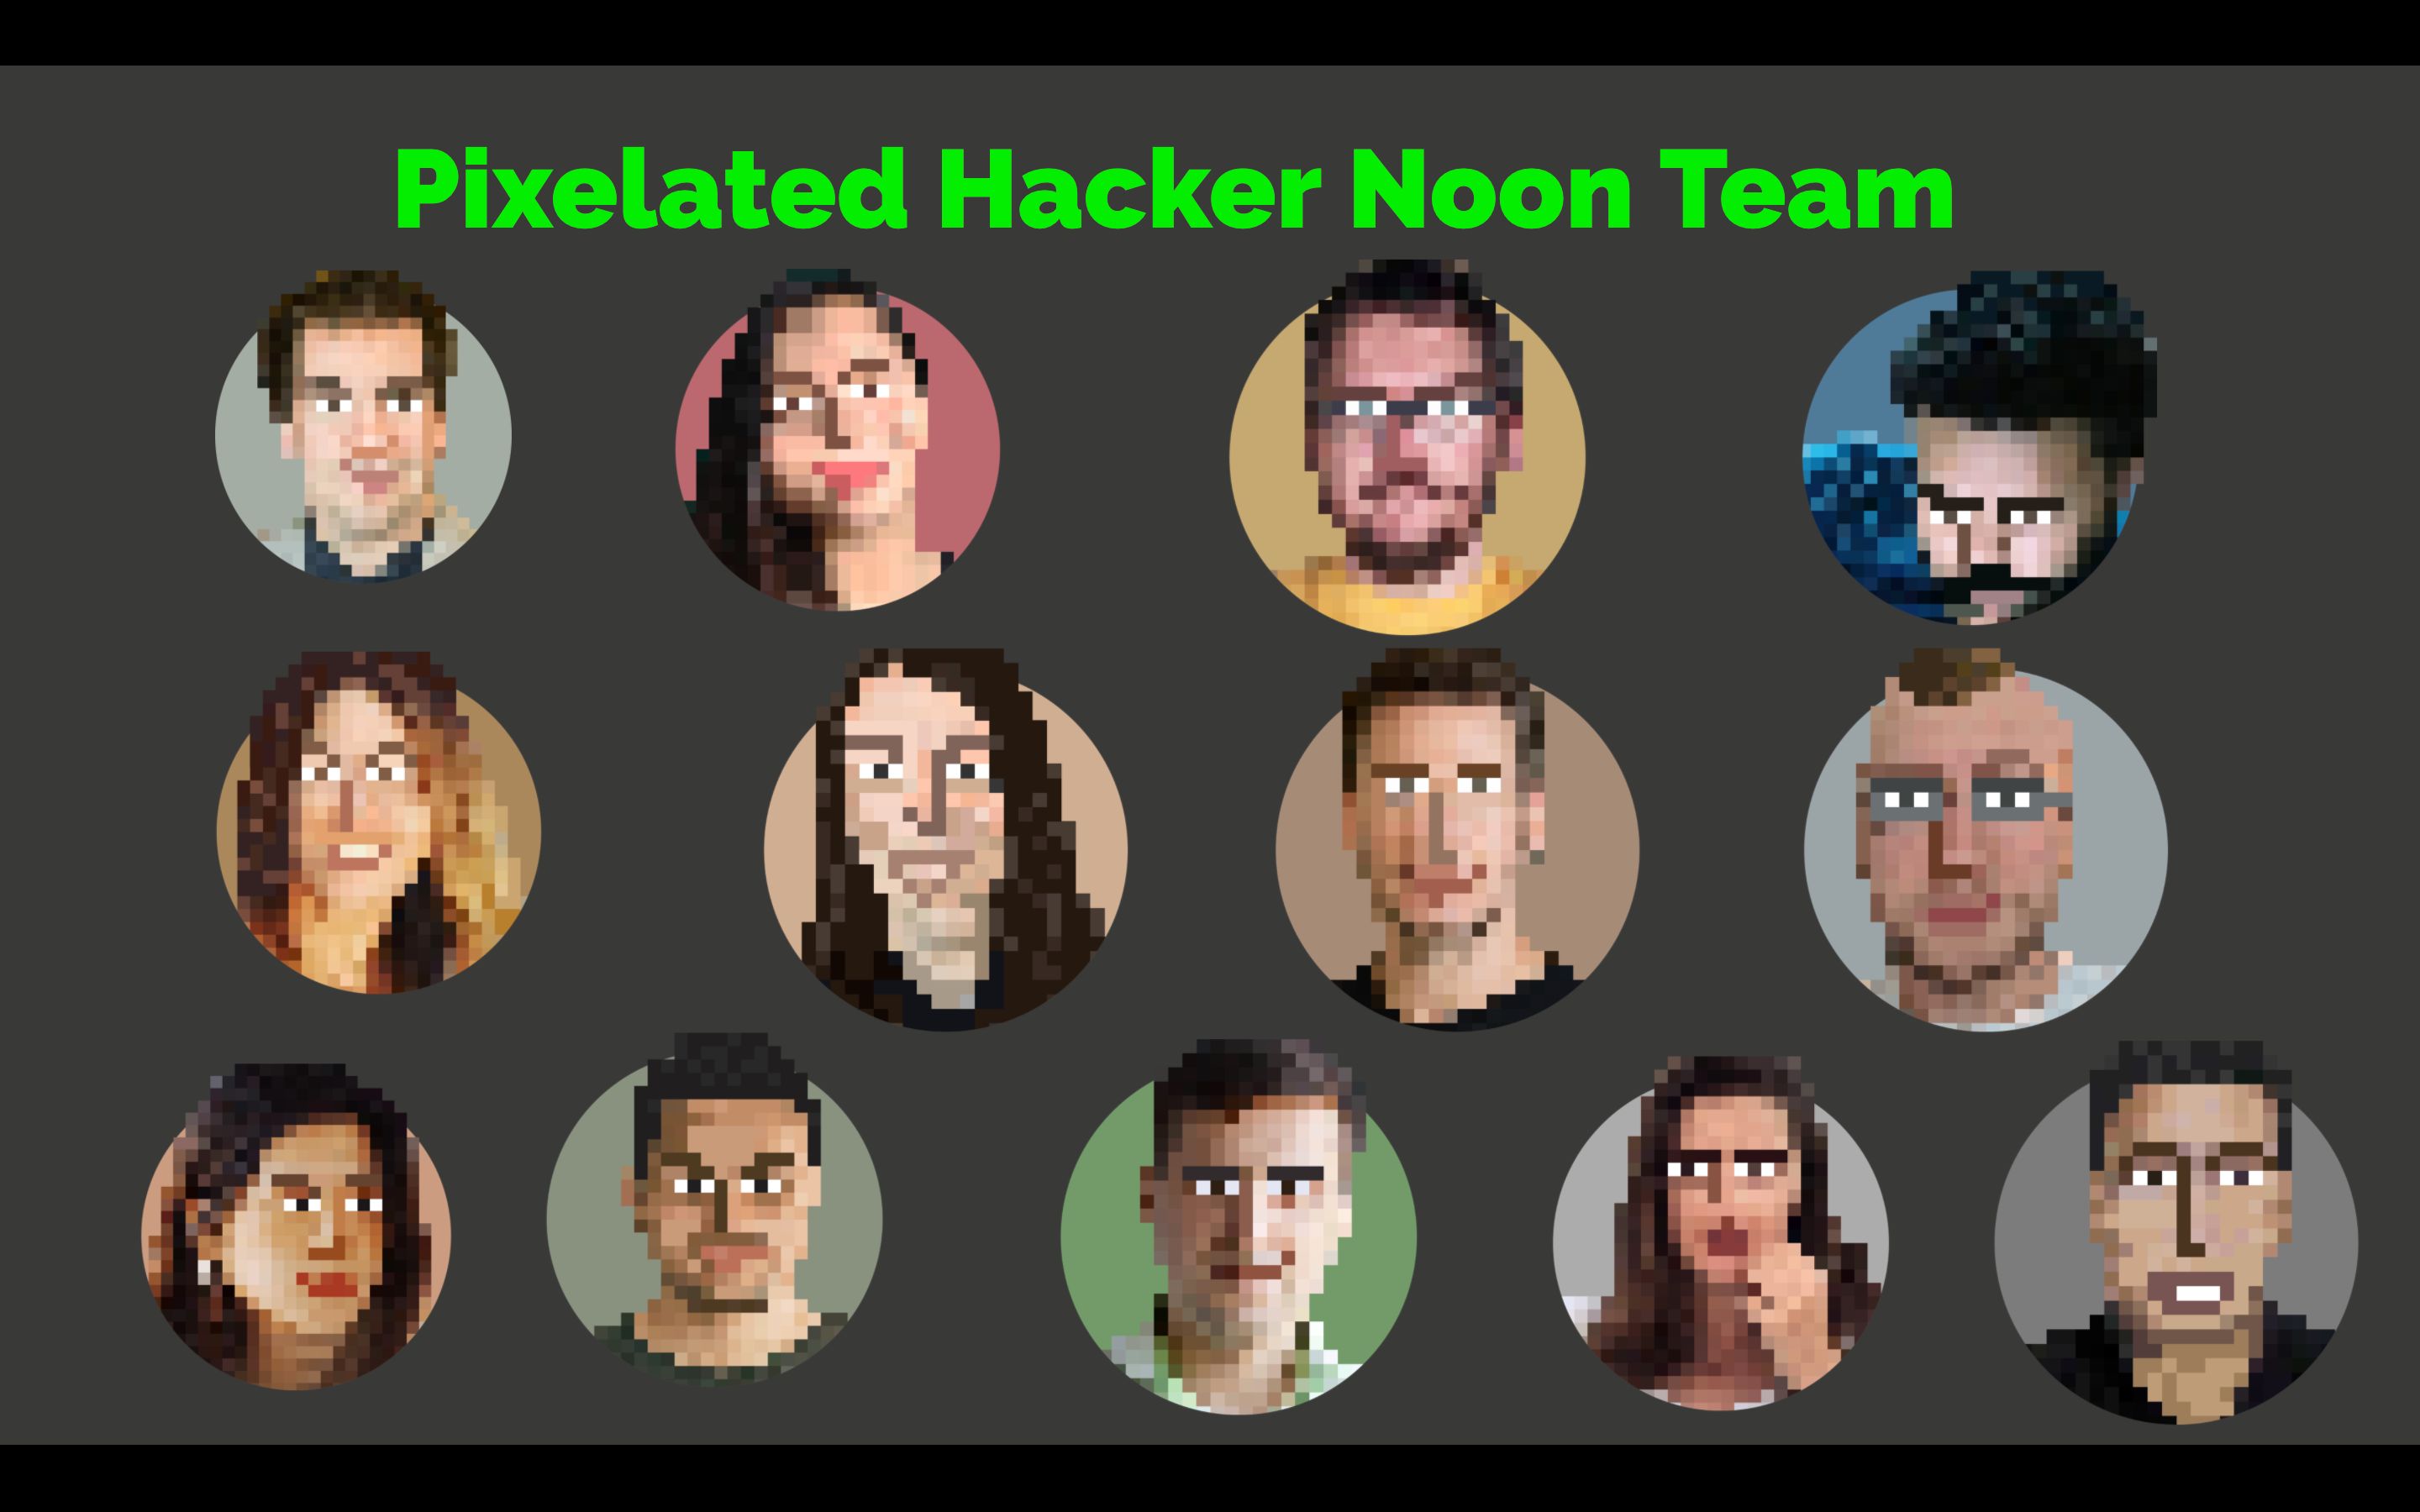 featured image - My Favorite things about my pixelated teammates at Hacker Noon